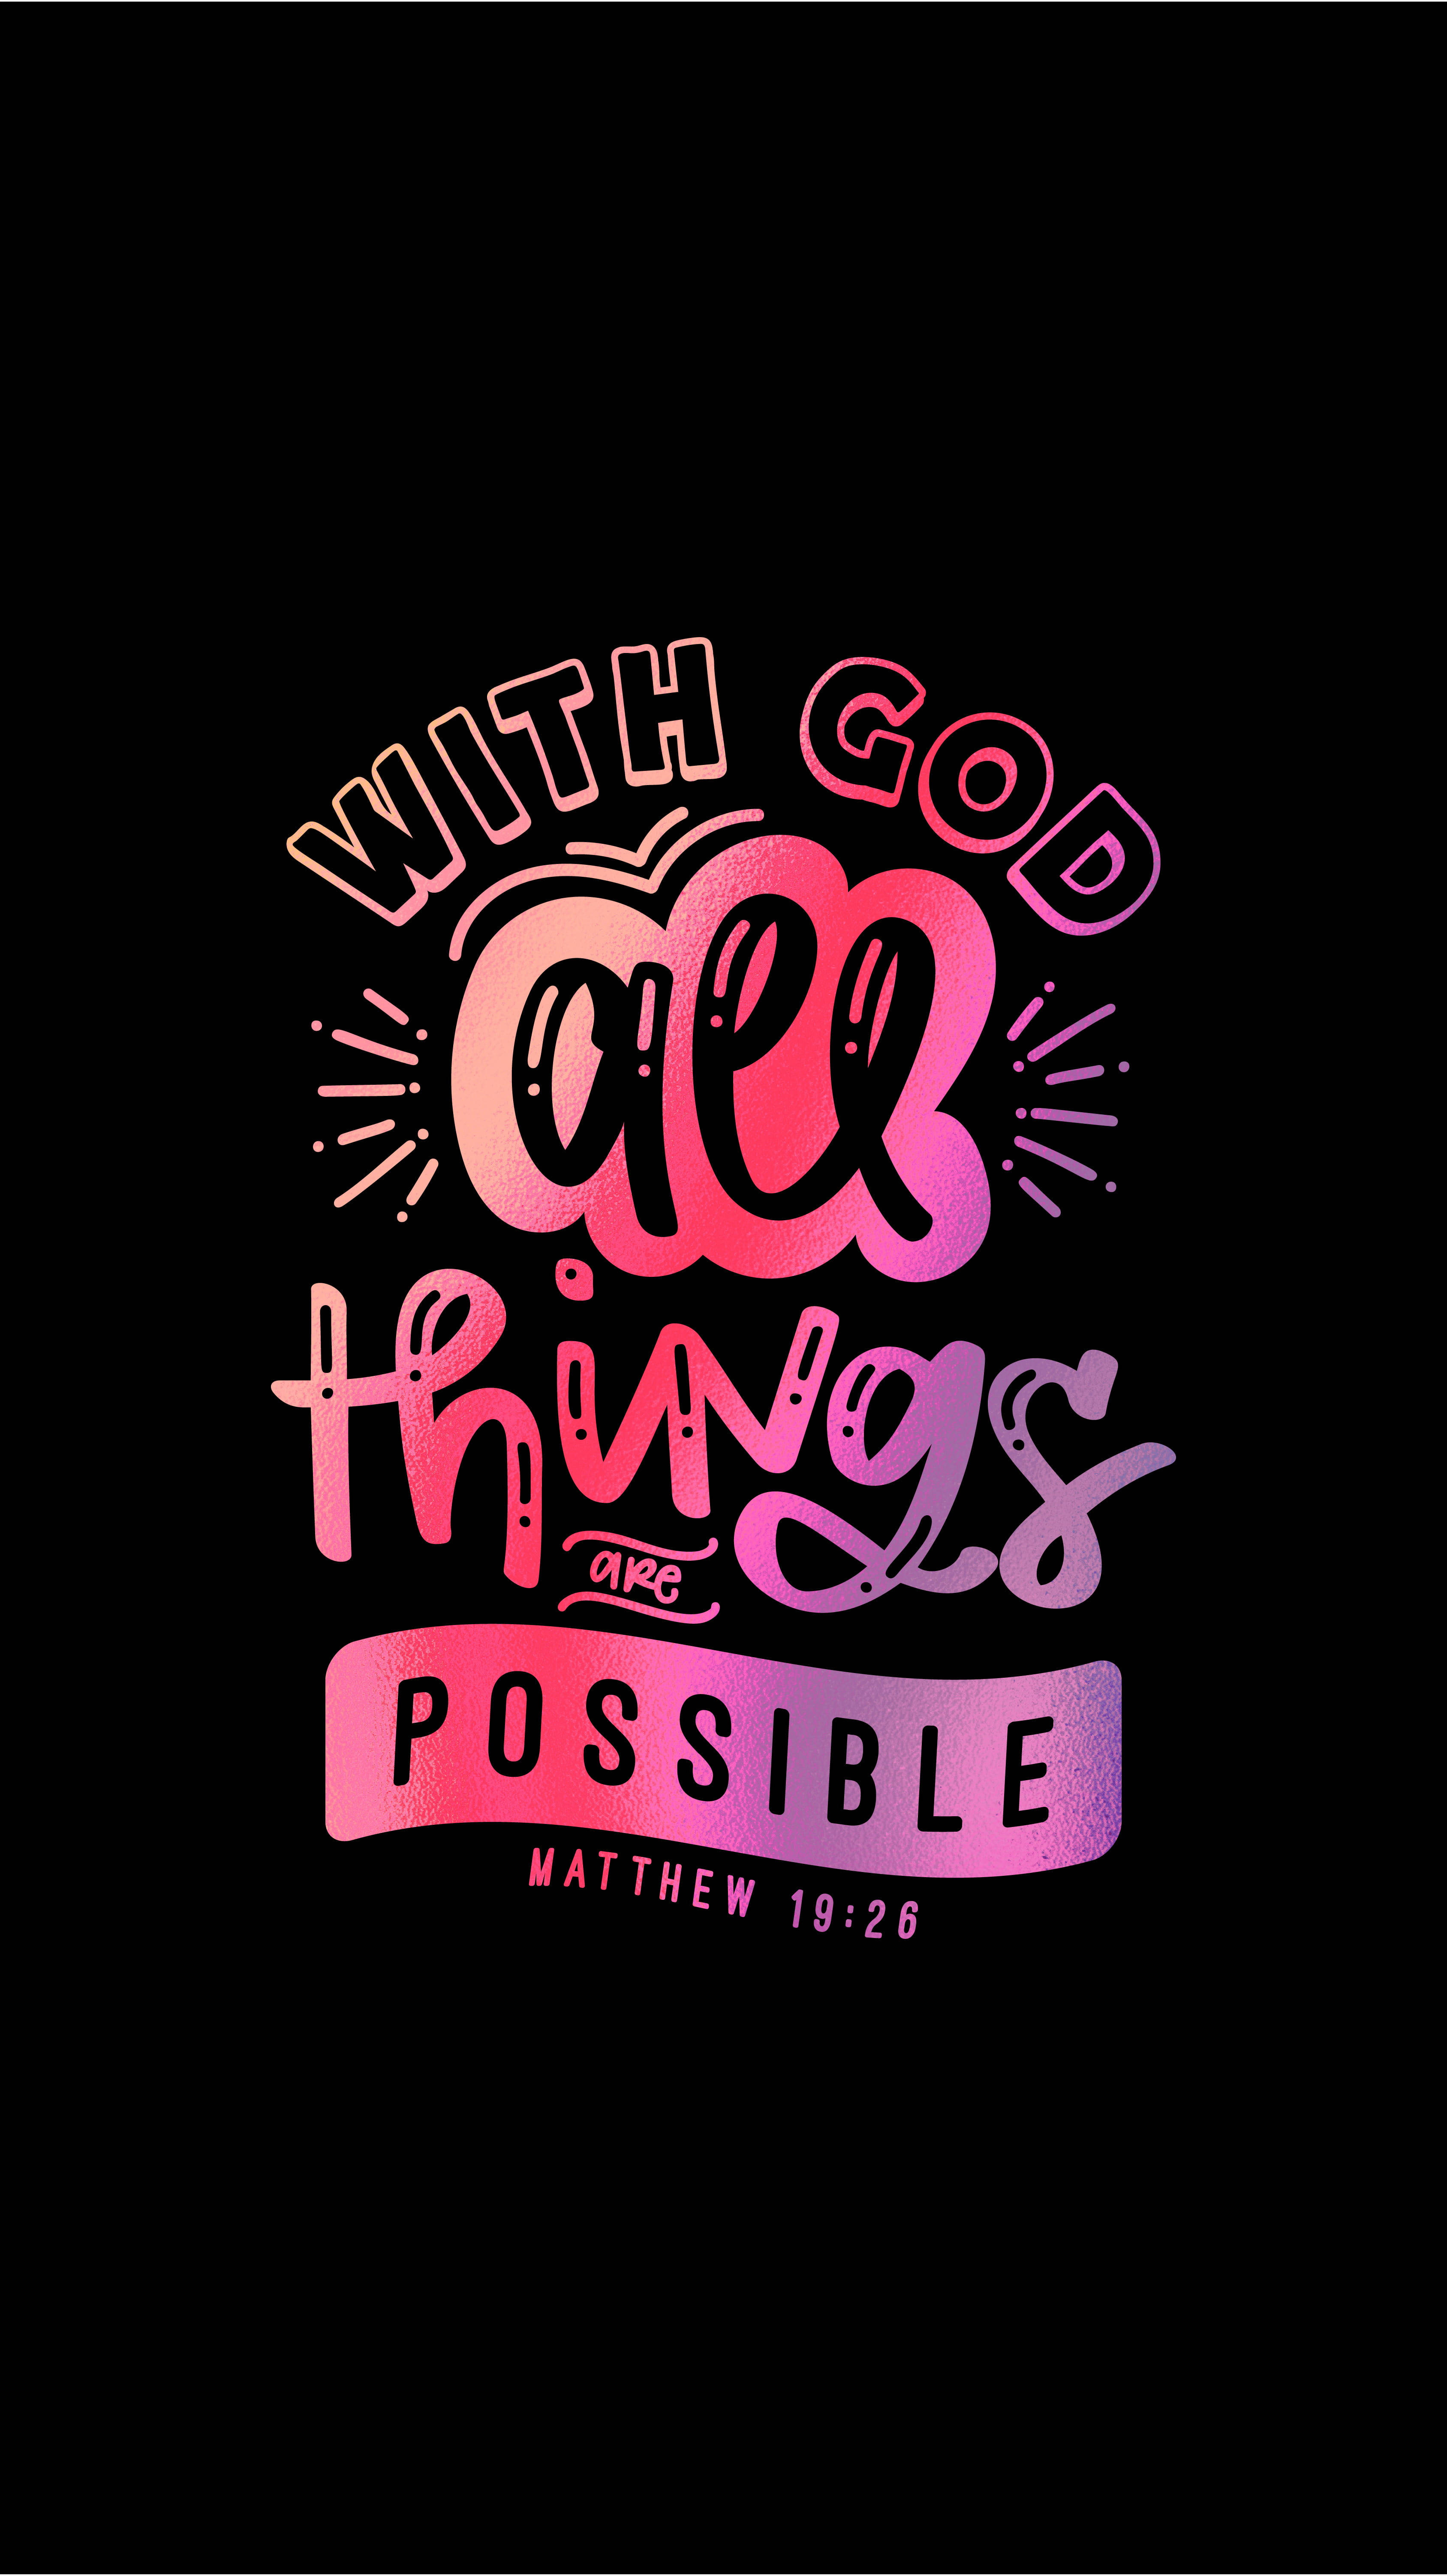 Biblical Things Are Possible Wallpaper